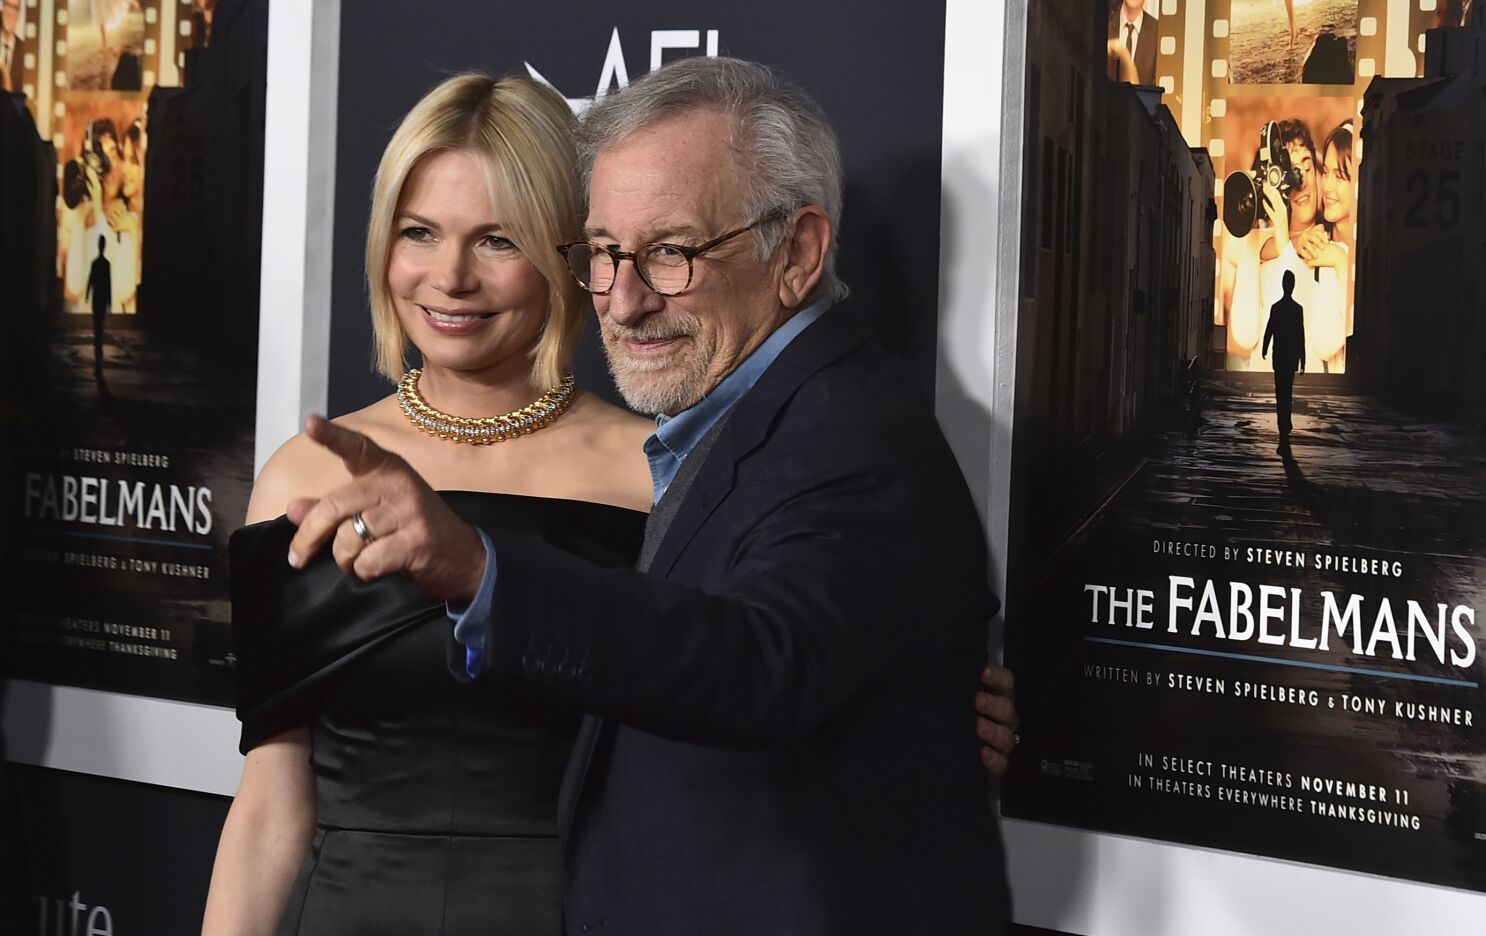 Steven Spielberg and Michelle Williams at the premiere of The Fabelmans